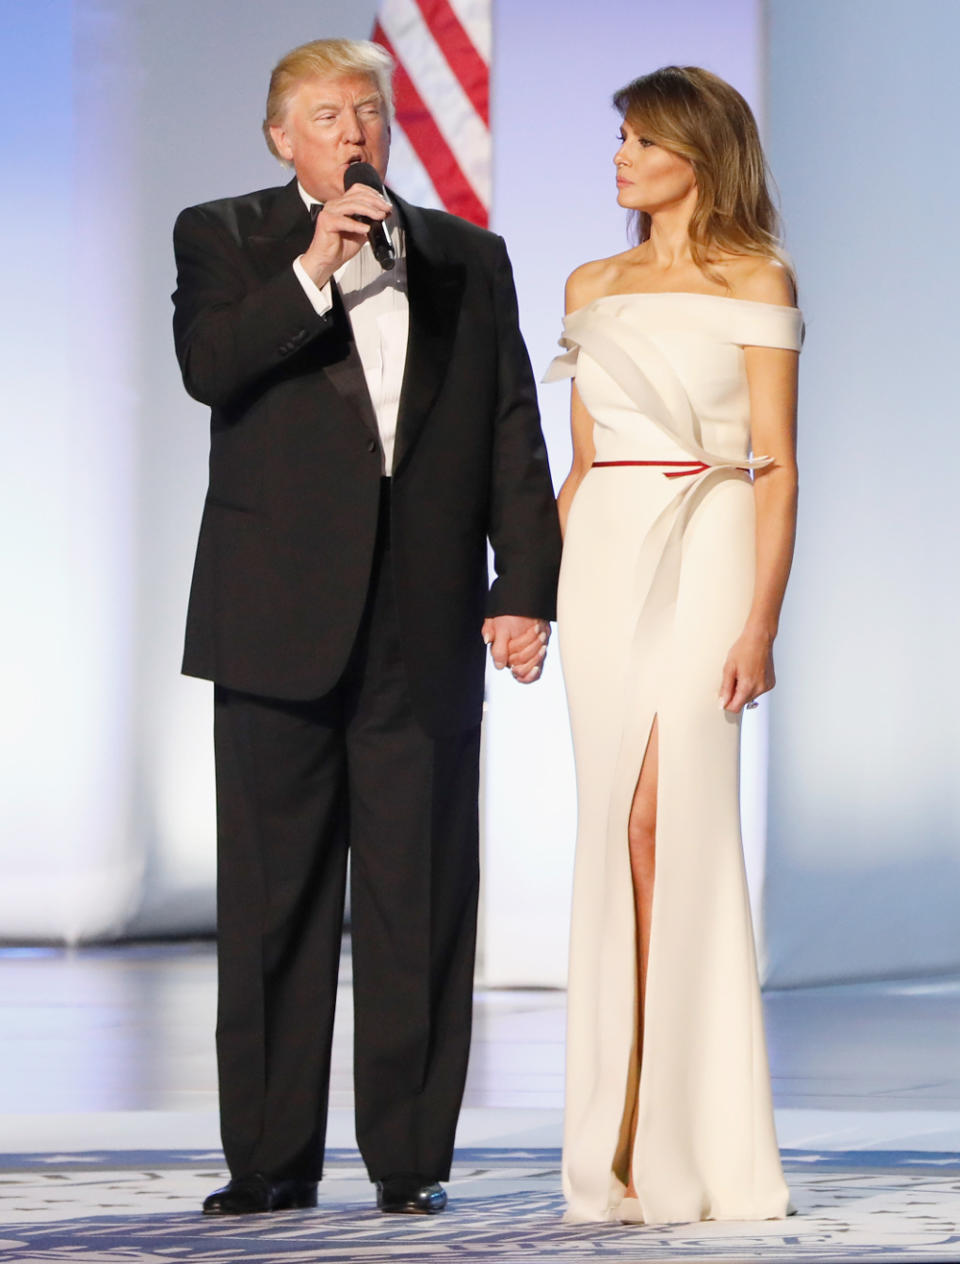 The Designer of Melania Trump’s Inaugural Ball Gown Loved Working With Her